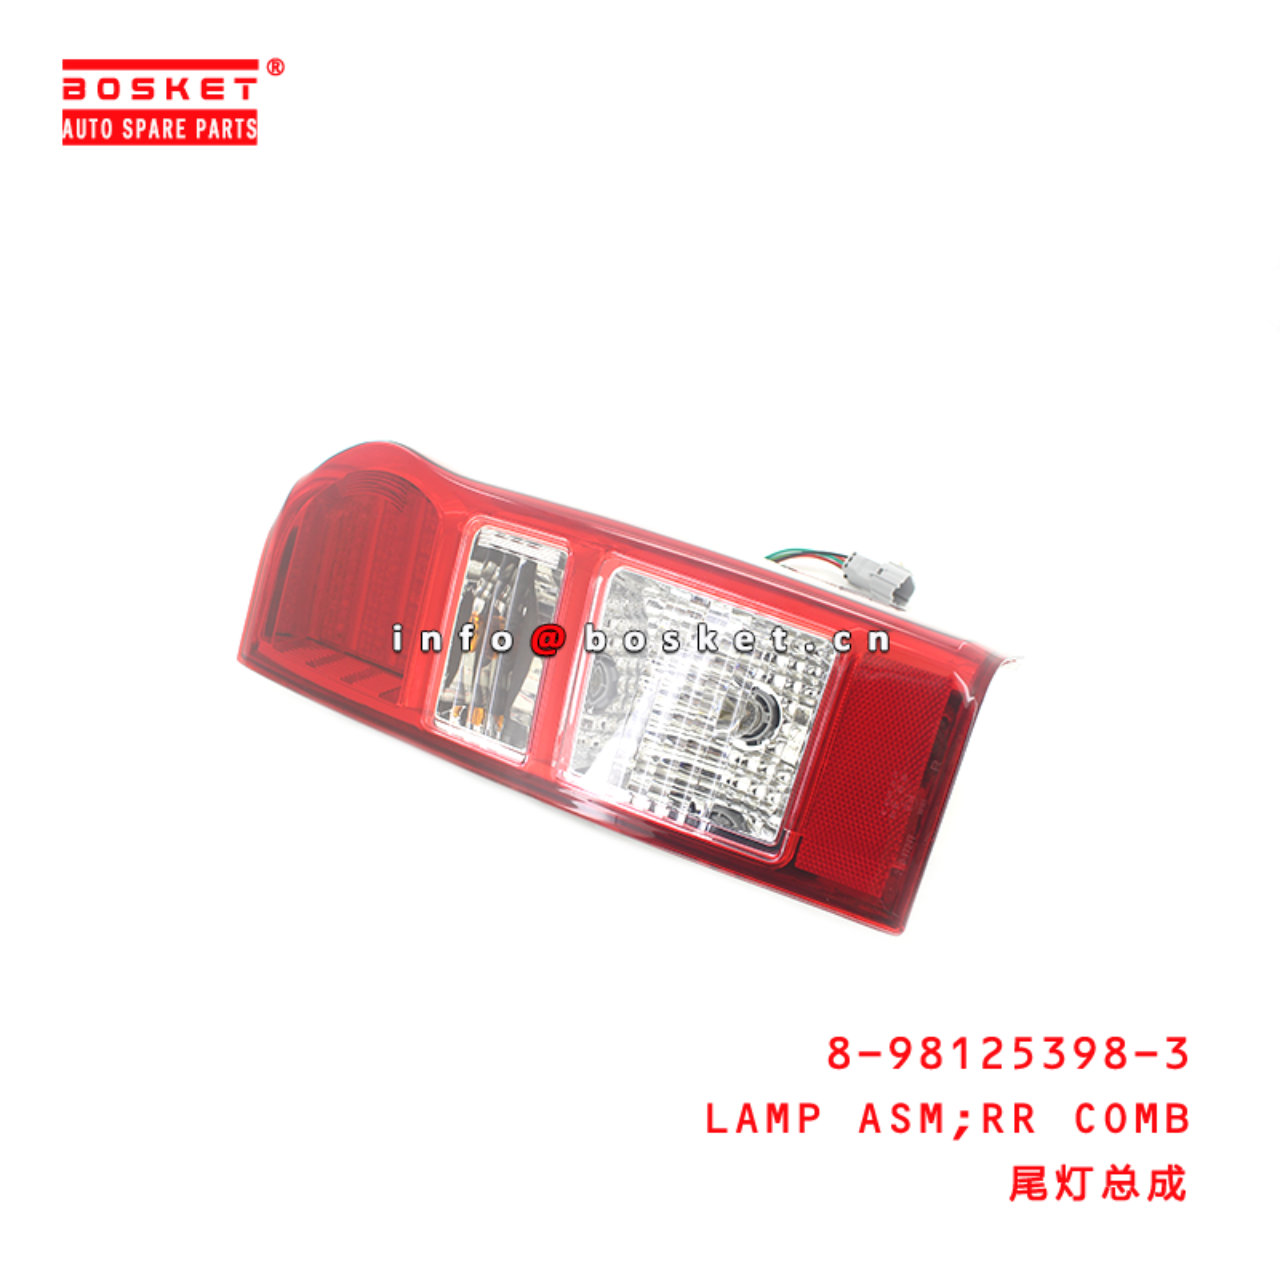 8-98125398-3 Rear Combination Lamp Assembly 8981253983 Suitable for ISUZU D-MAX 2012